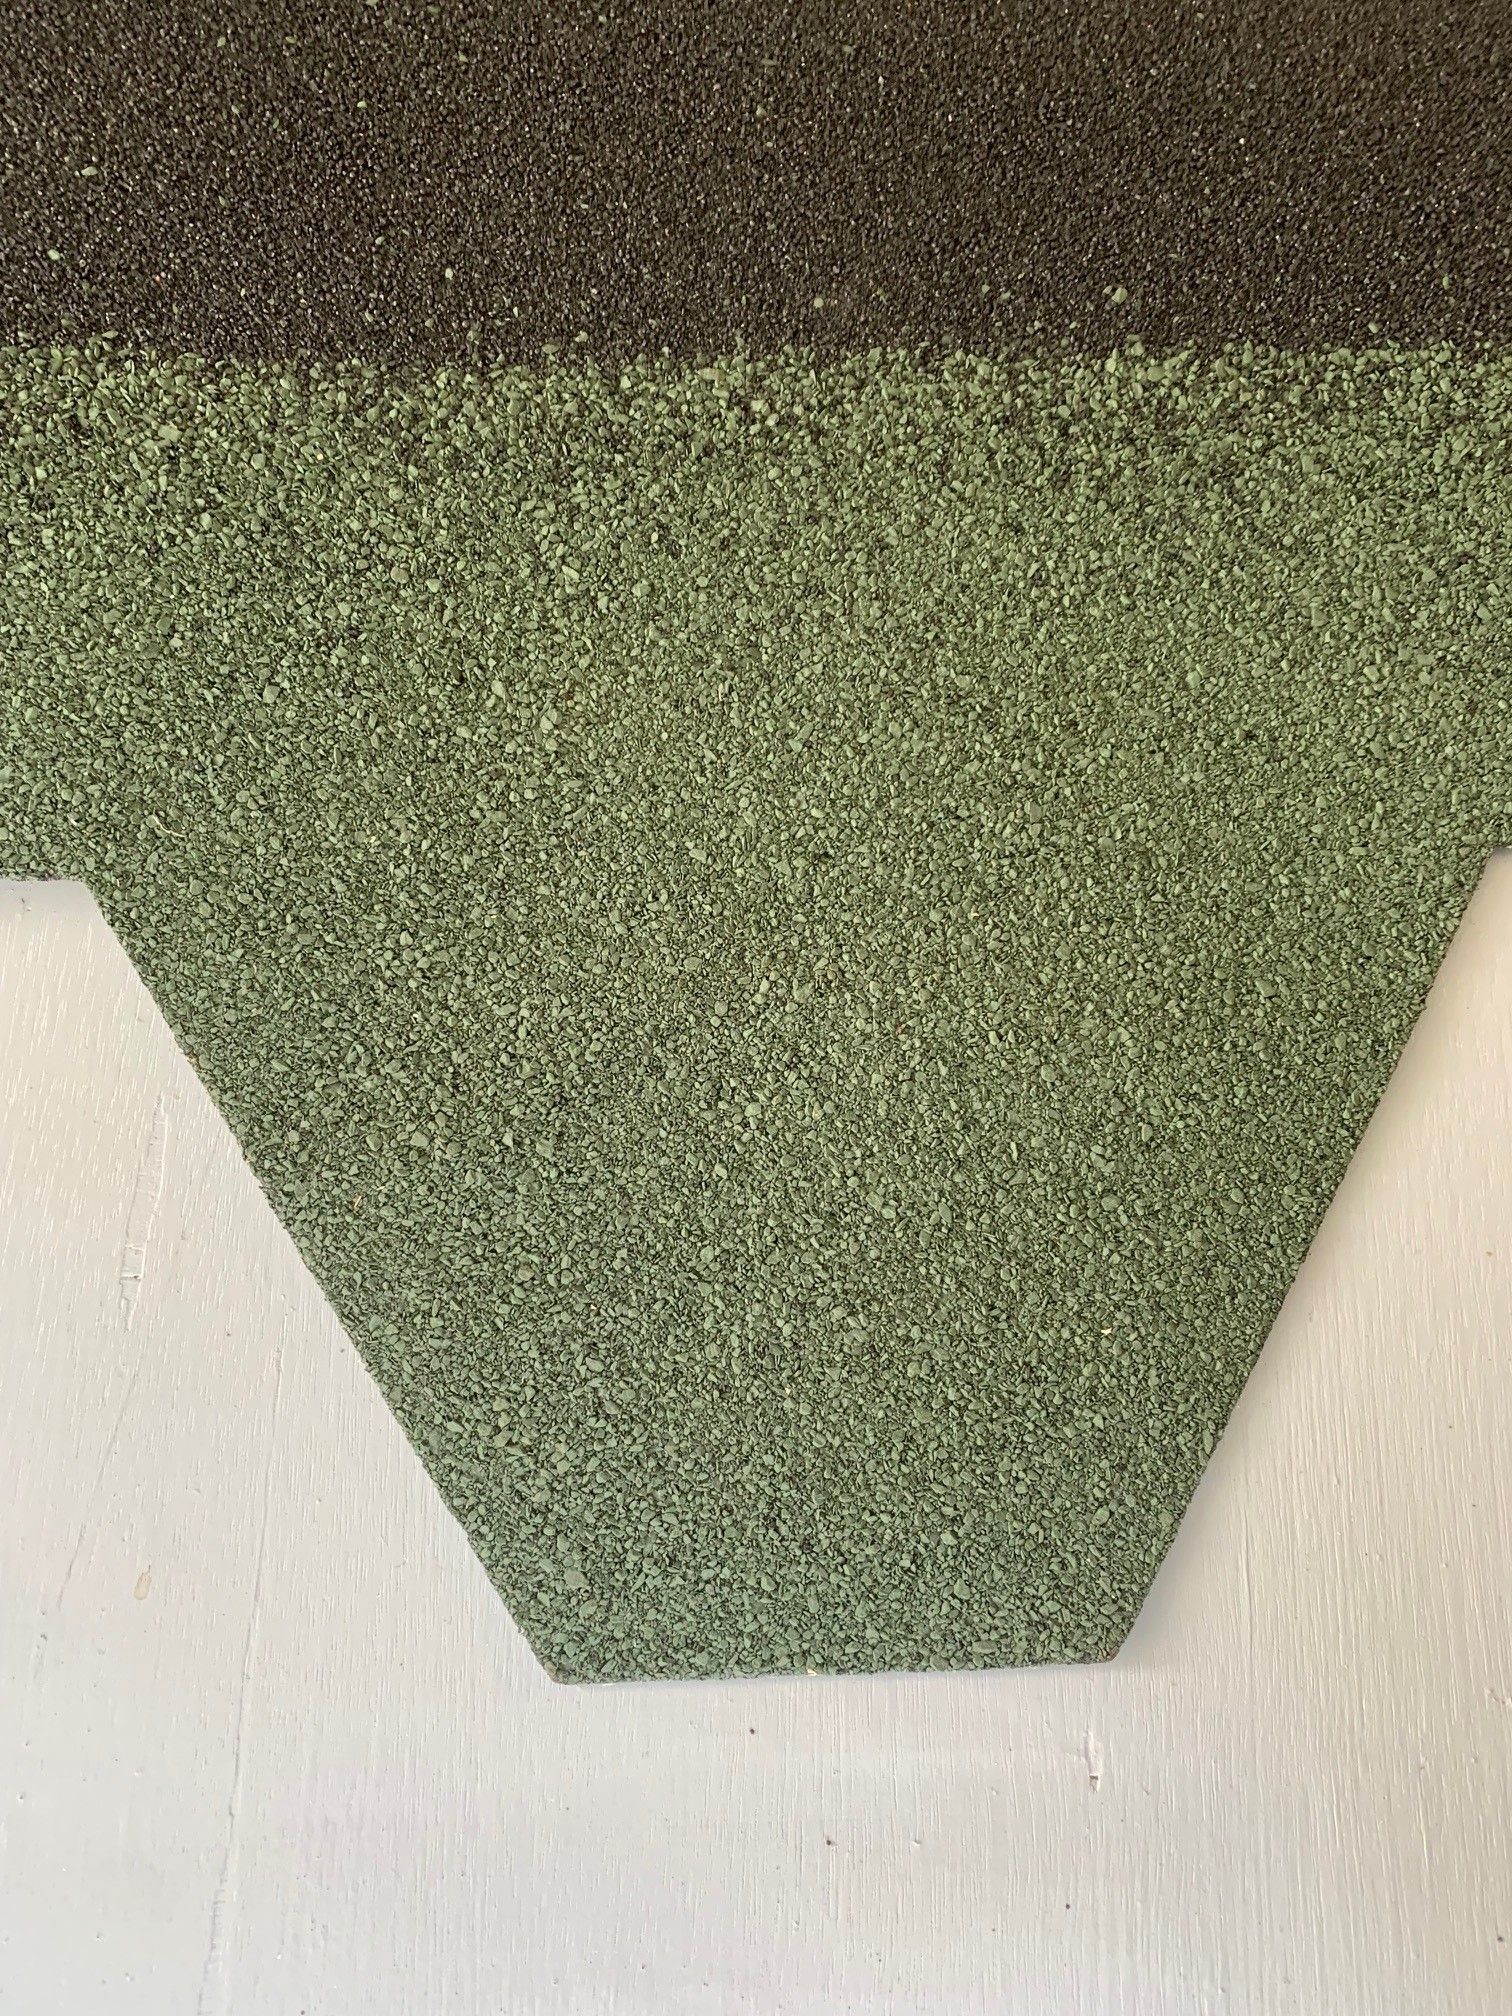 Green shingles that go on our roofs as an option